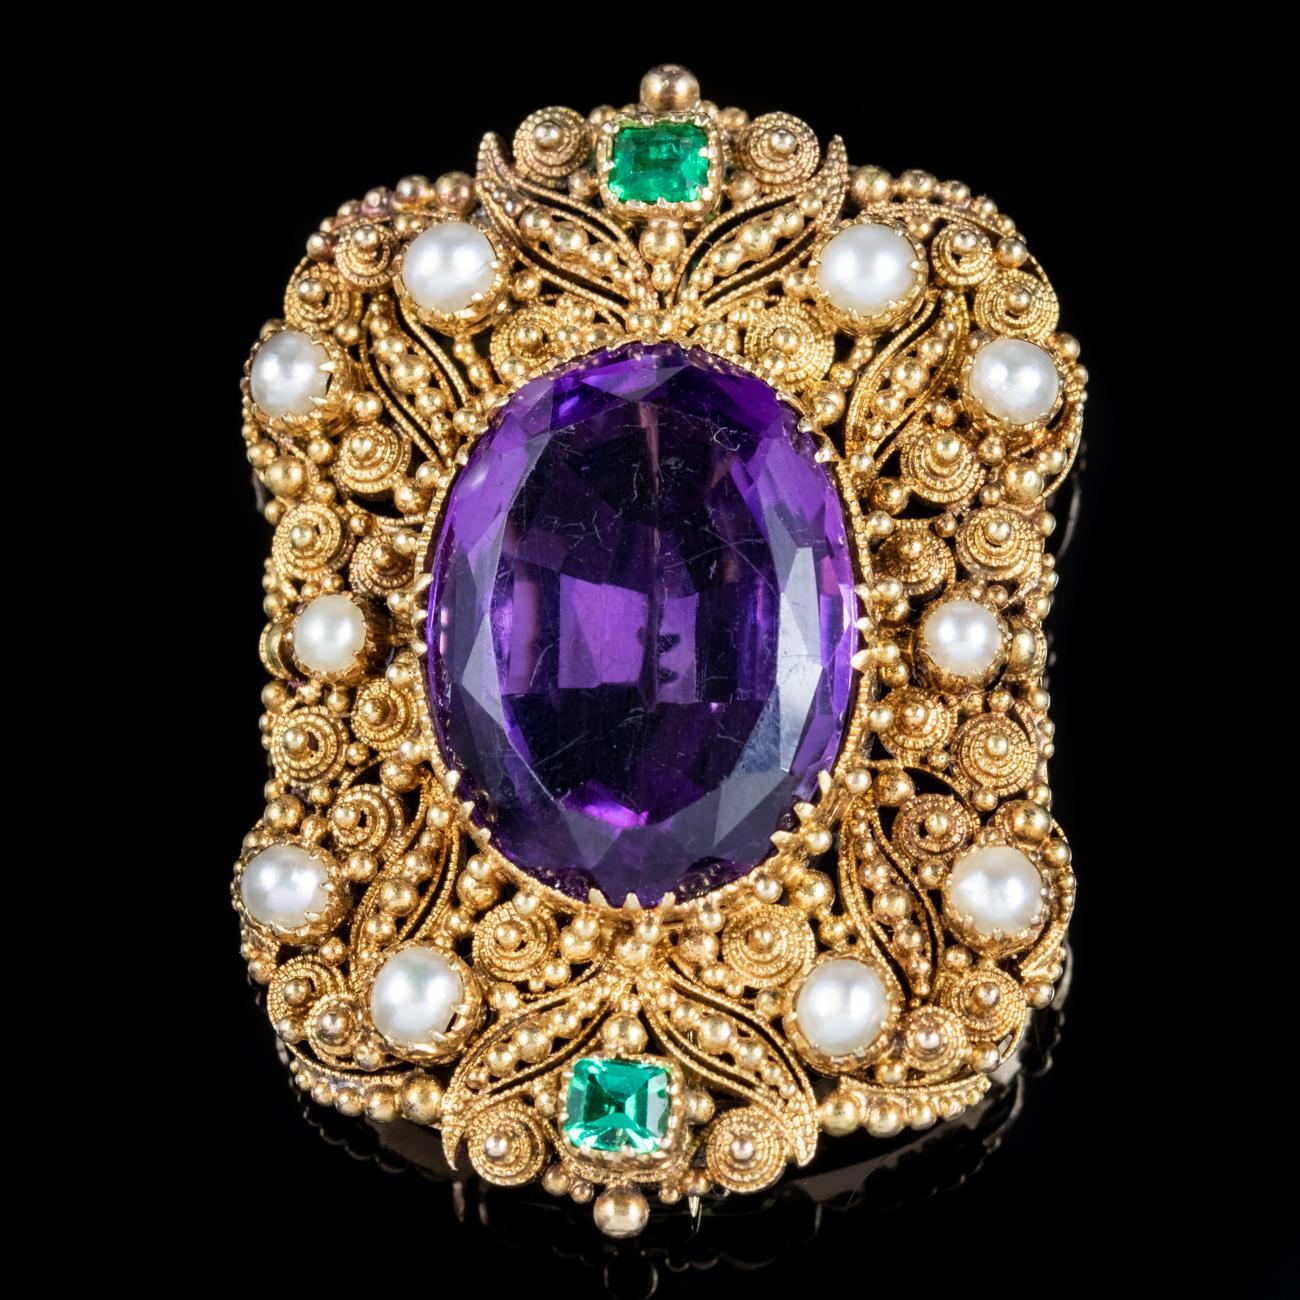 A fabulous antique Edwardian Suffragette brooch adorned with white Pearls, two green Emeralds and an impressive violet Amethyst which is approx. 18ct. Suffragette jewellery was worn to show one’s allegiance to the women’s Suffragette movement in the